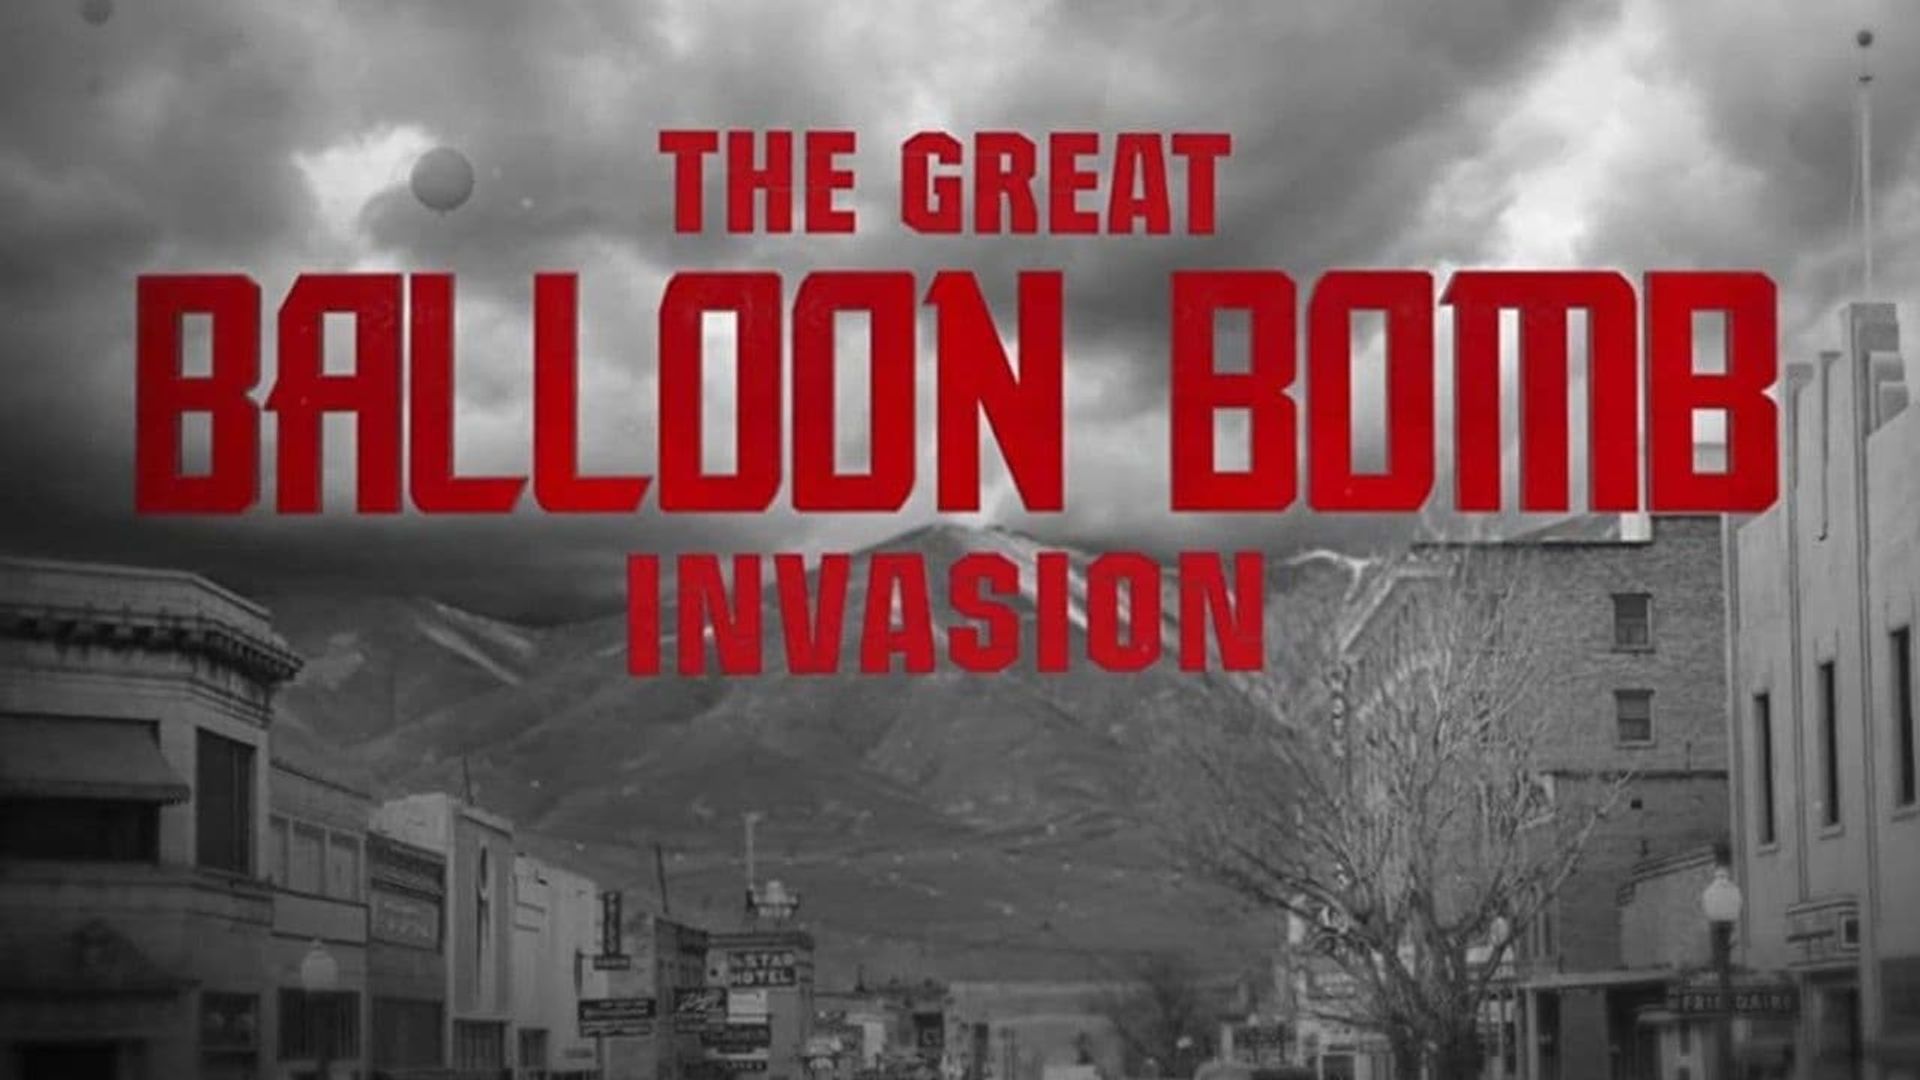 The Great Balloon Bomb Invasion background